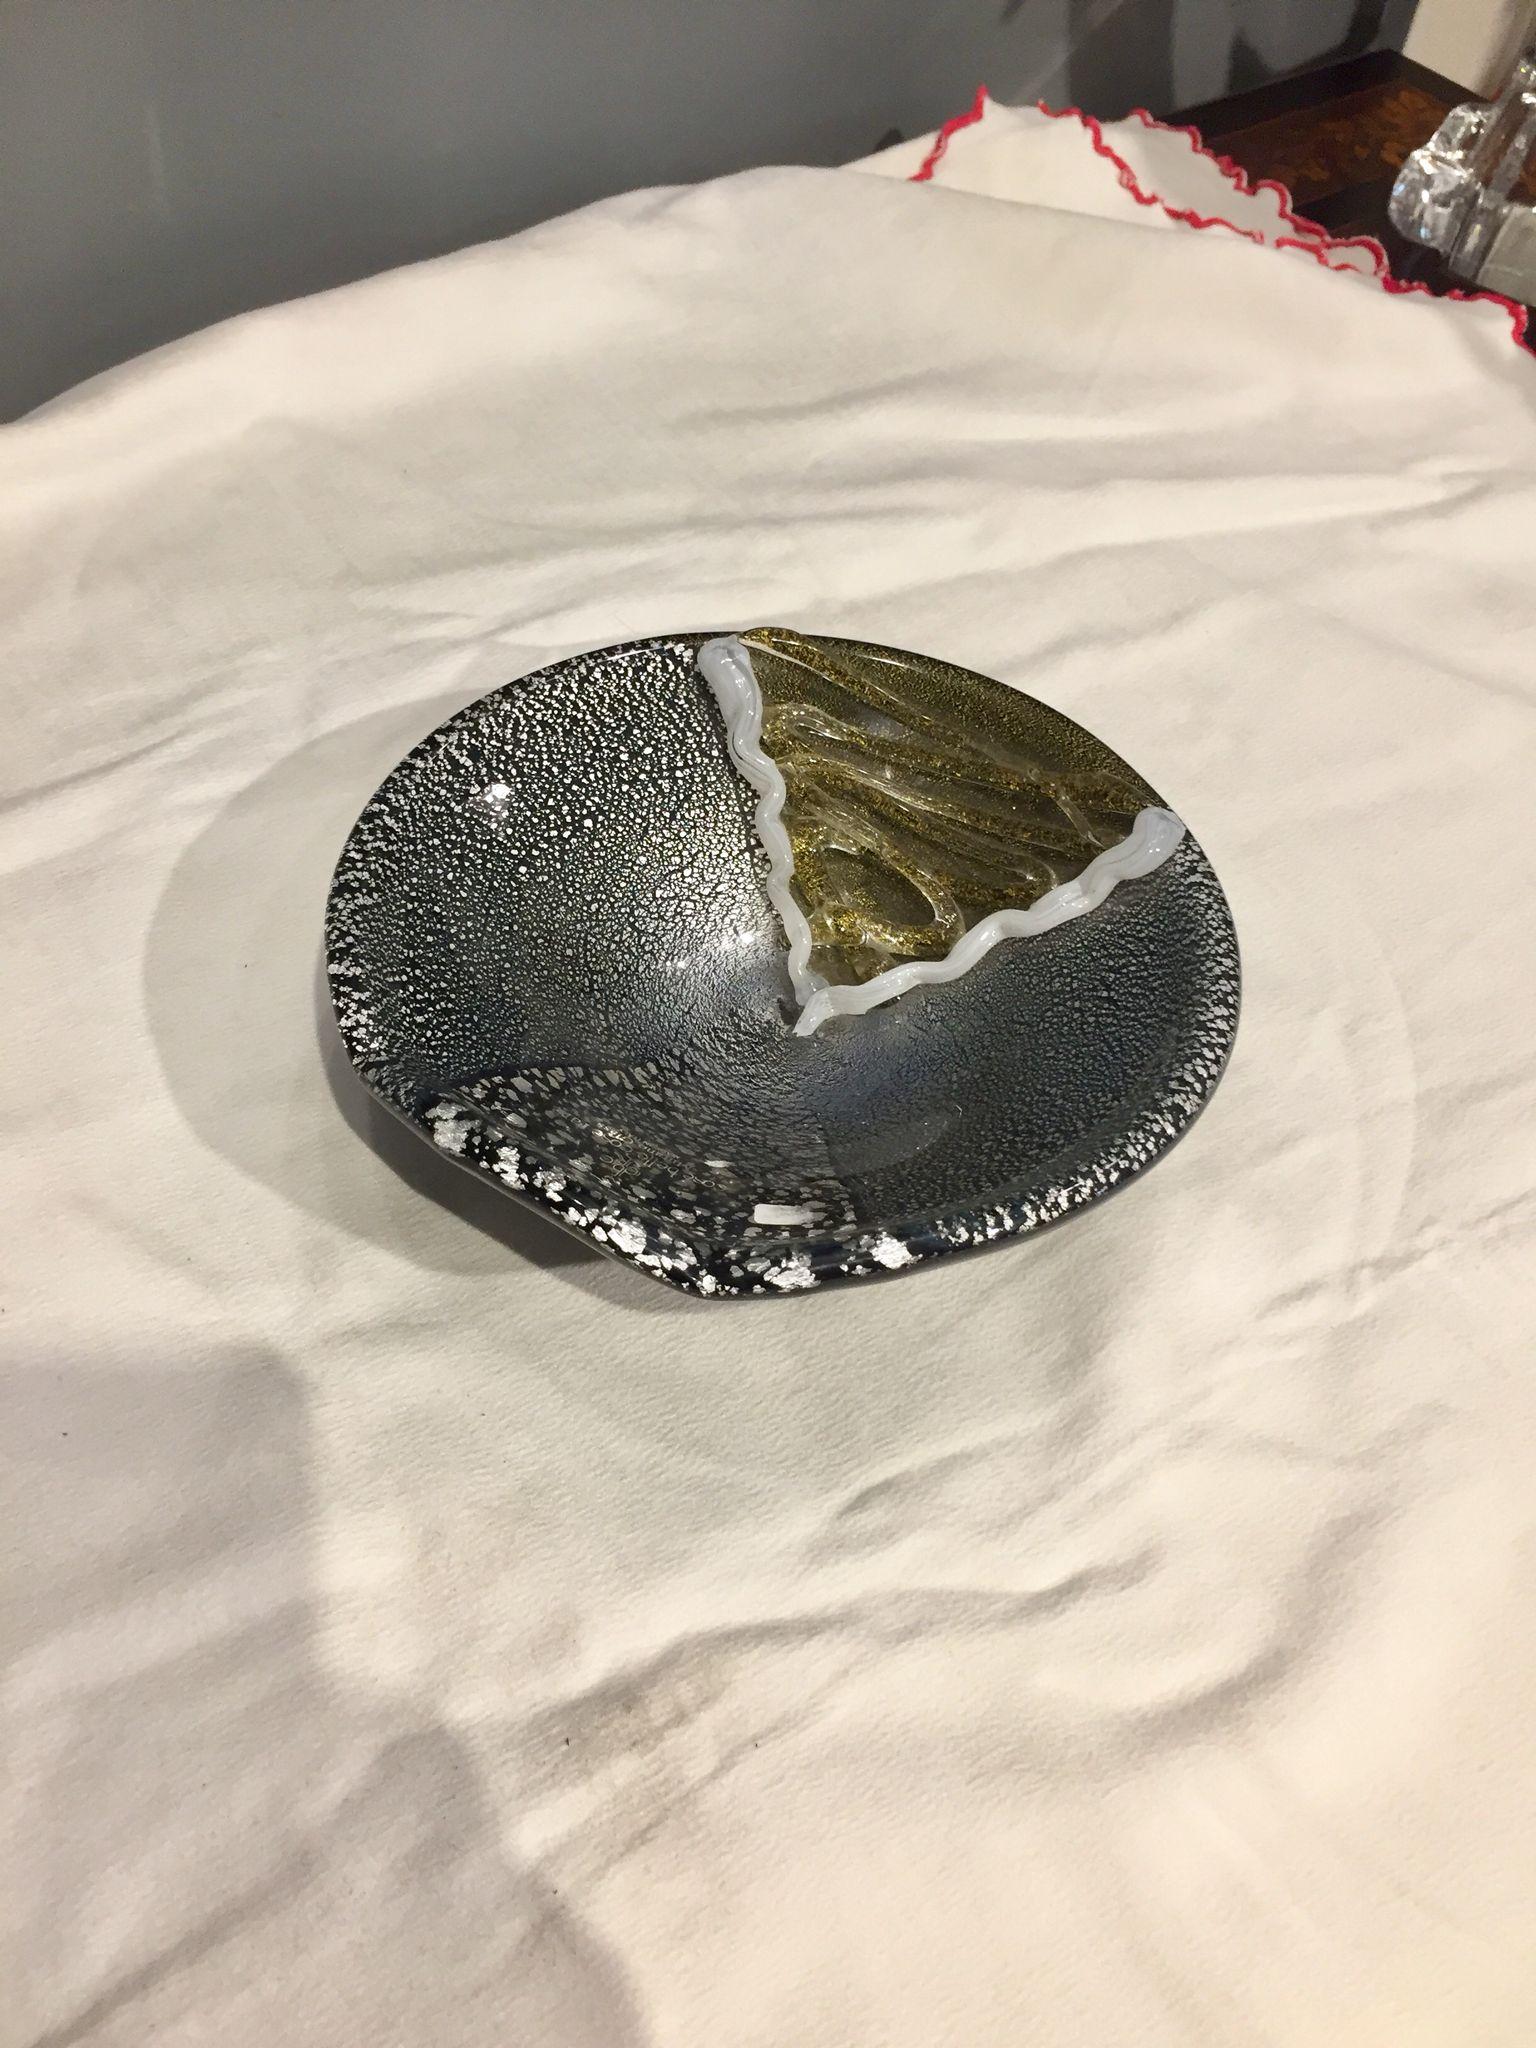 This incredible collectible ashtray features a licorice black body with transparent applications and golden reflections, with a snow effect.
Signed on the bottom.
Unique item to furnish your home with elegance.
Excellent conditions.